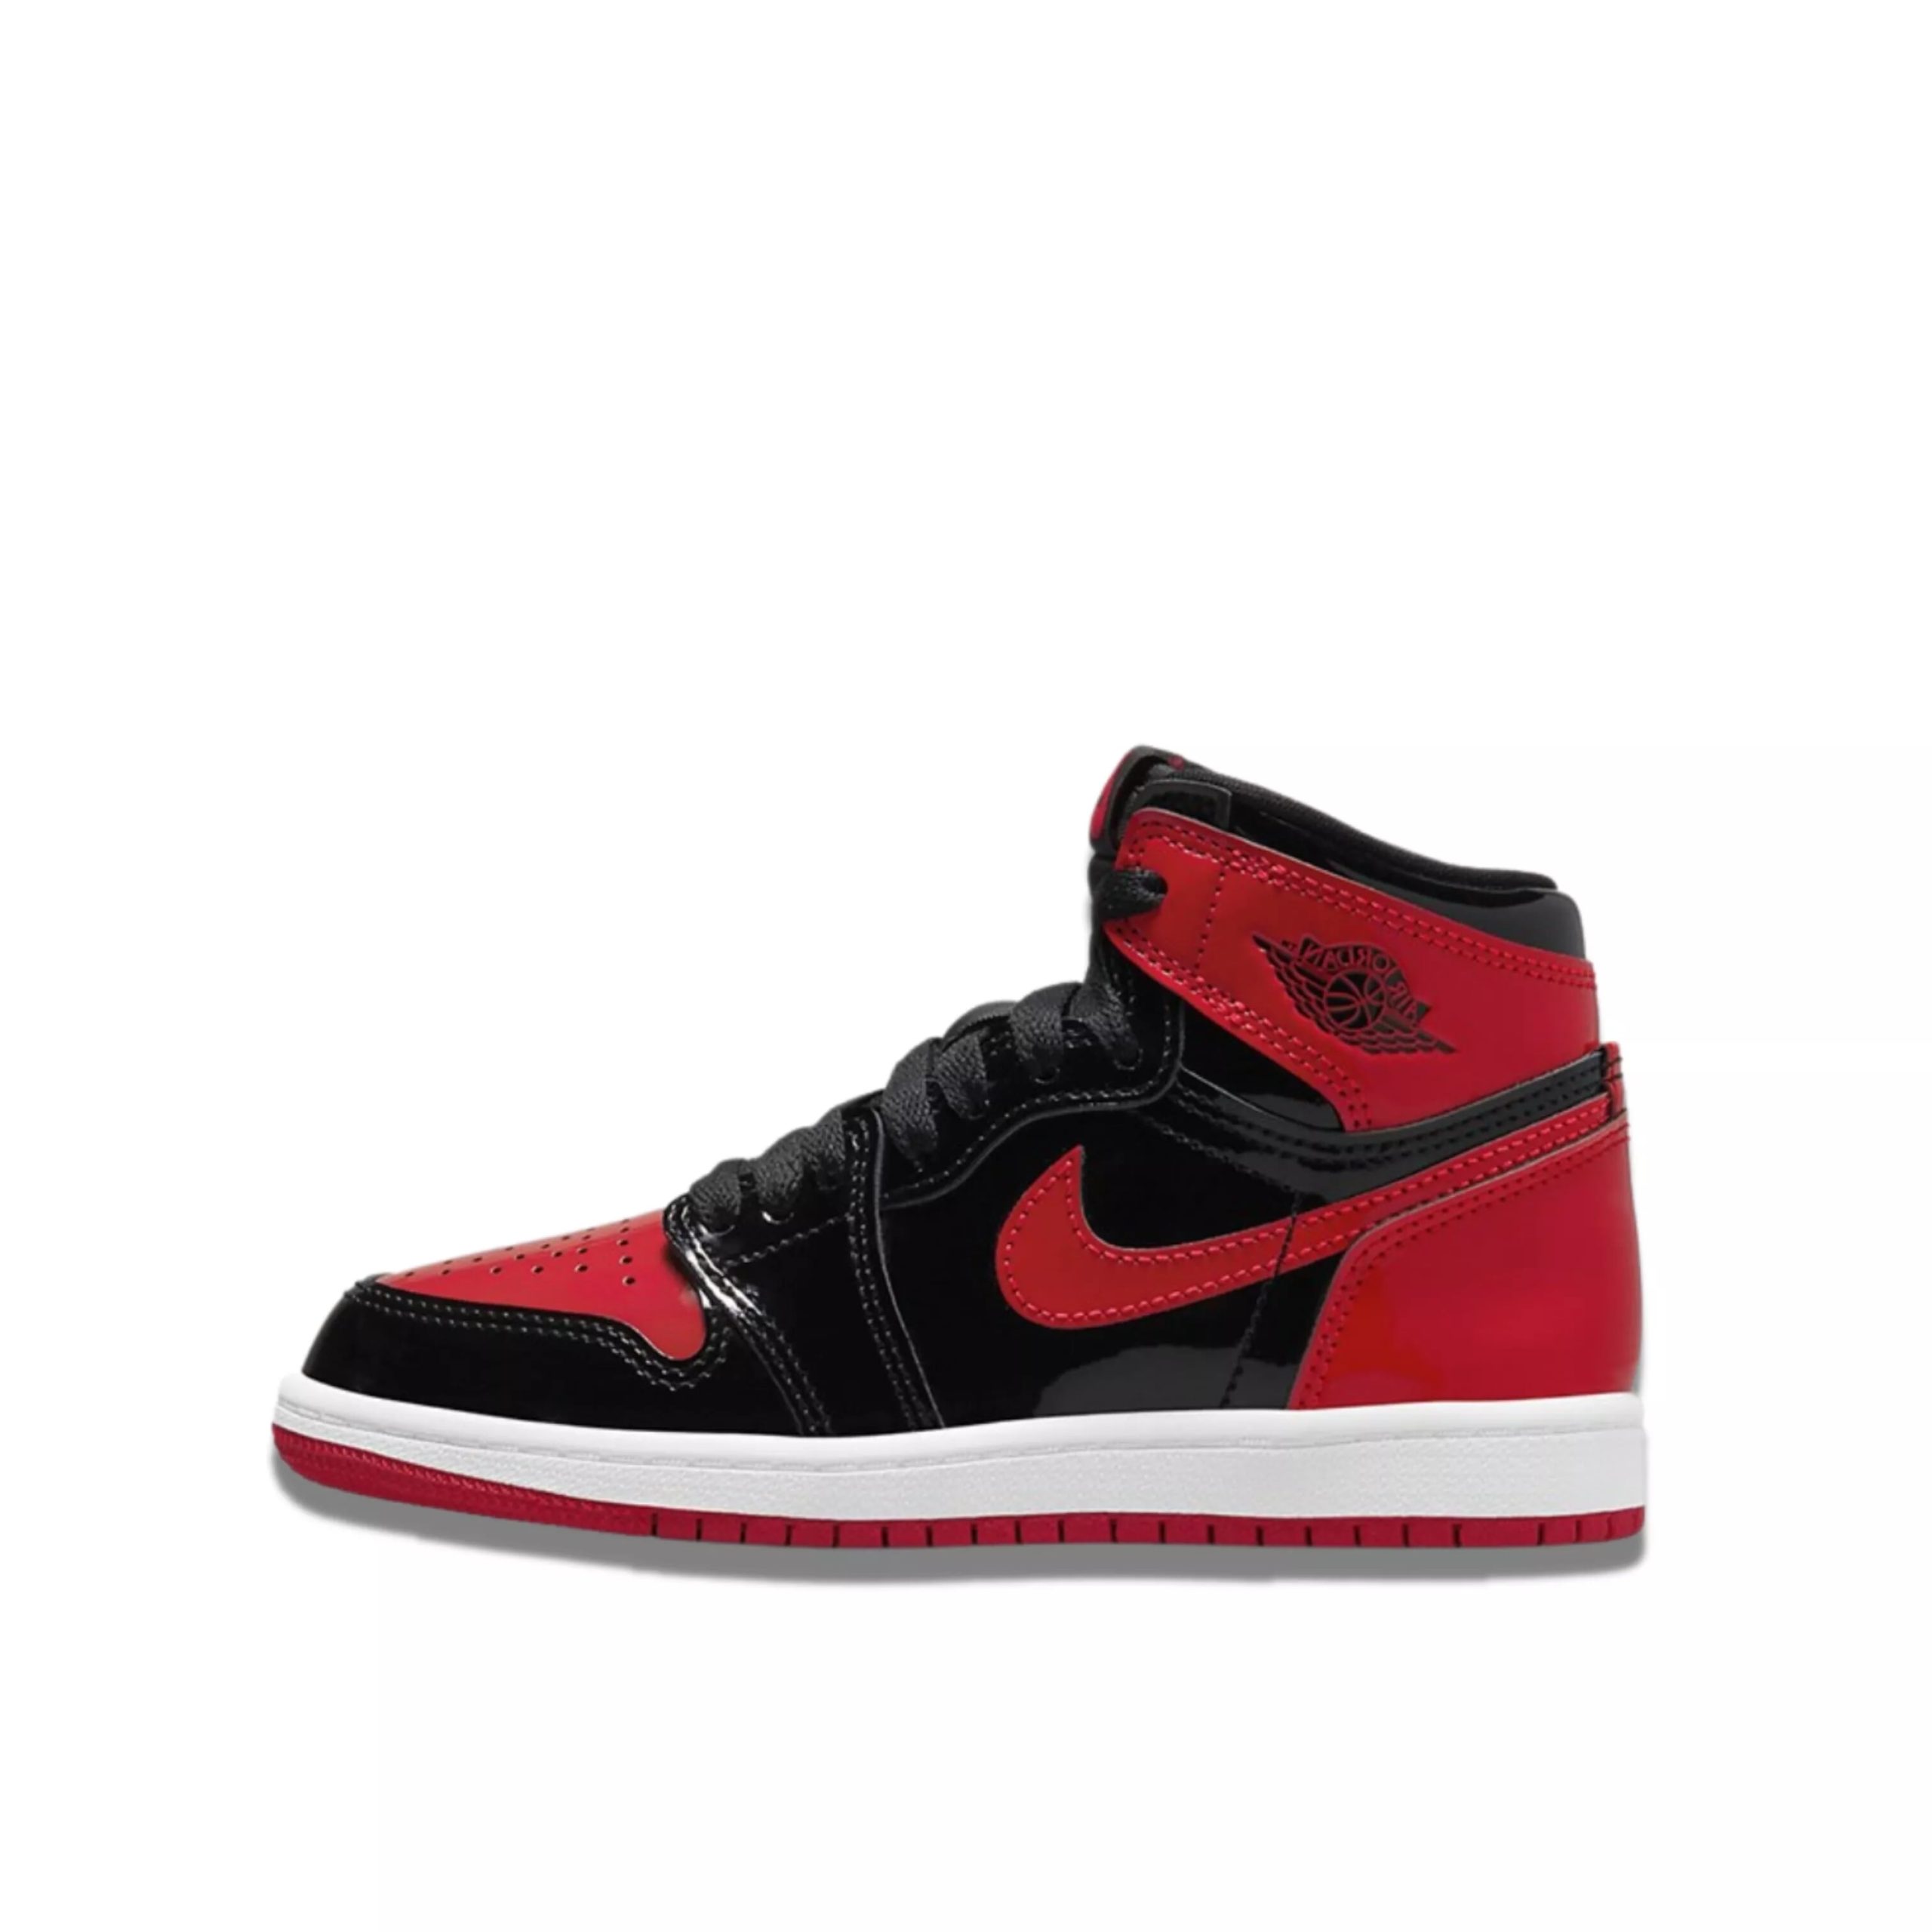 air jordan 1 retro high og patent bred child and baby 9999 scaled